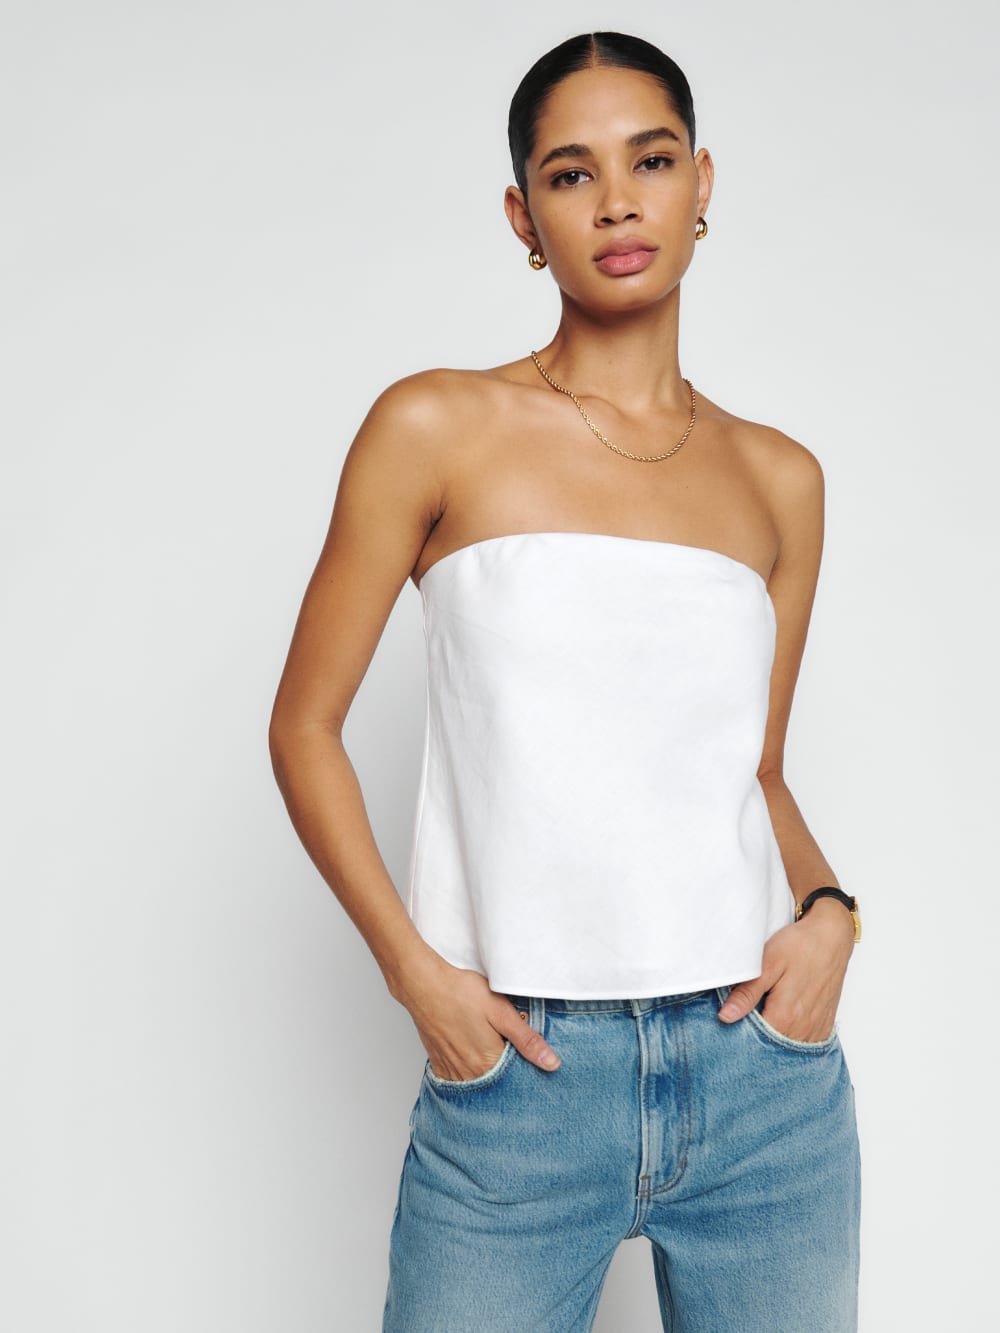 Reformation spritz linen top in white. It has an elastic bandeau neckline. Non-adjustable straps. Lightweight 100% linen fabric. linen. The model is wearing it with blue jeans. 